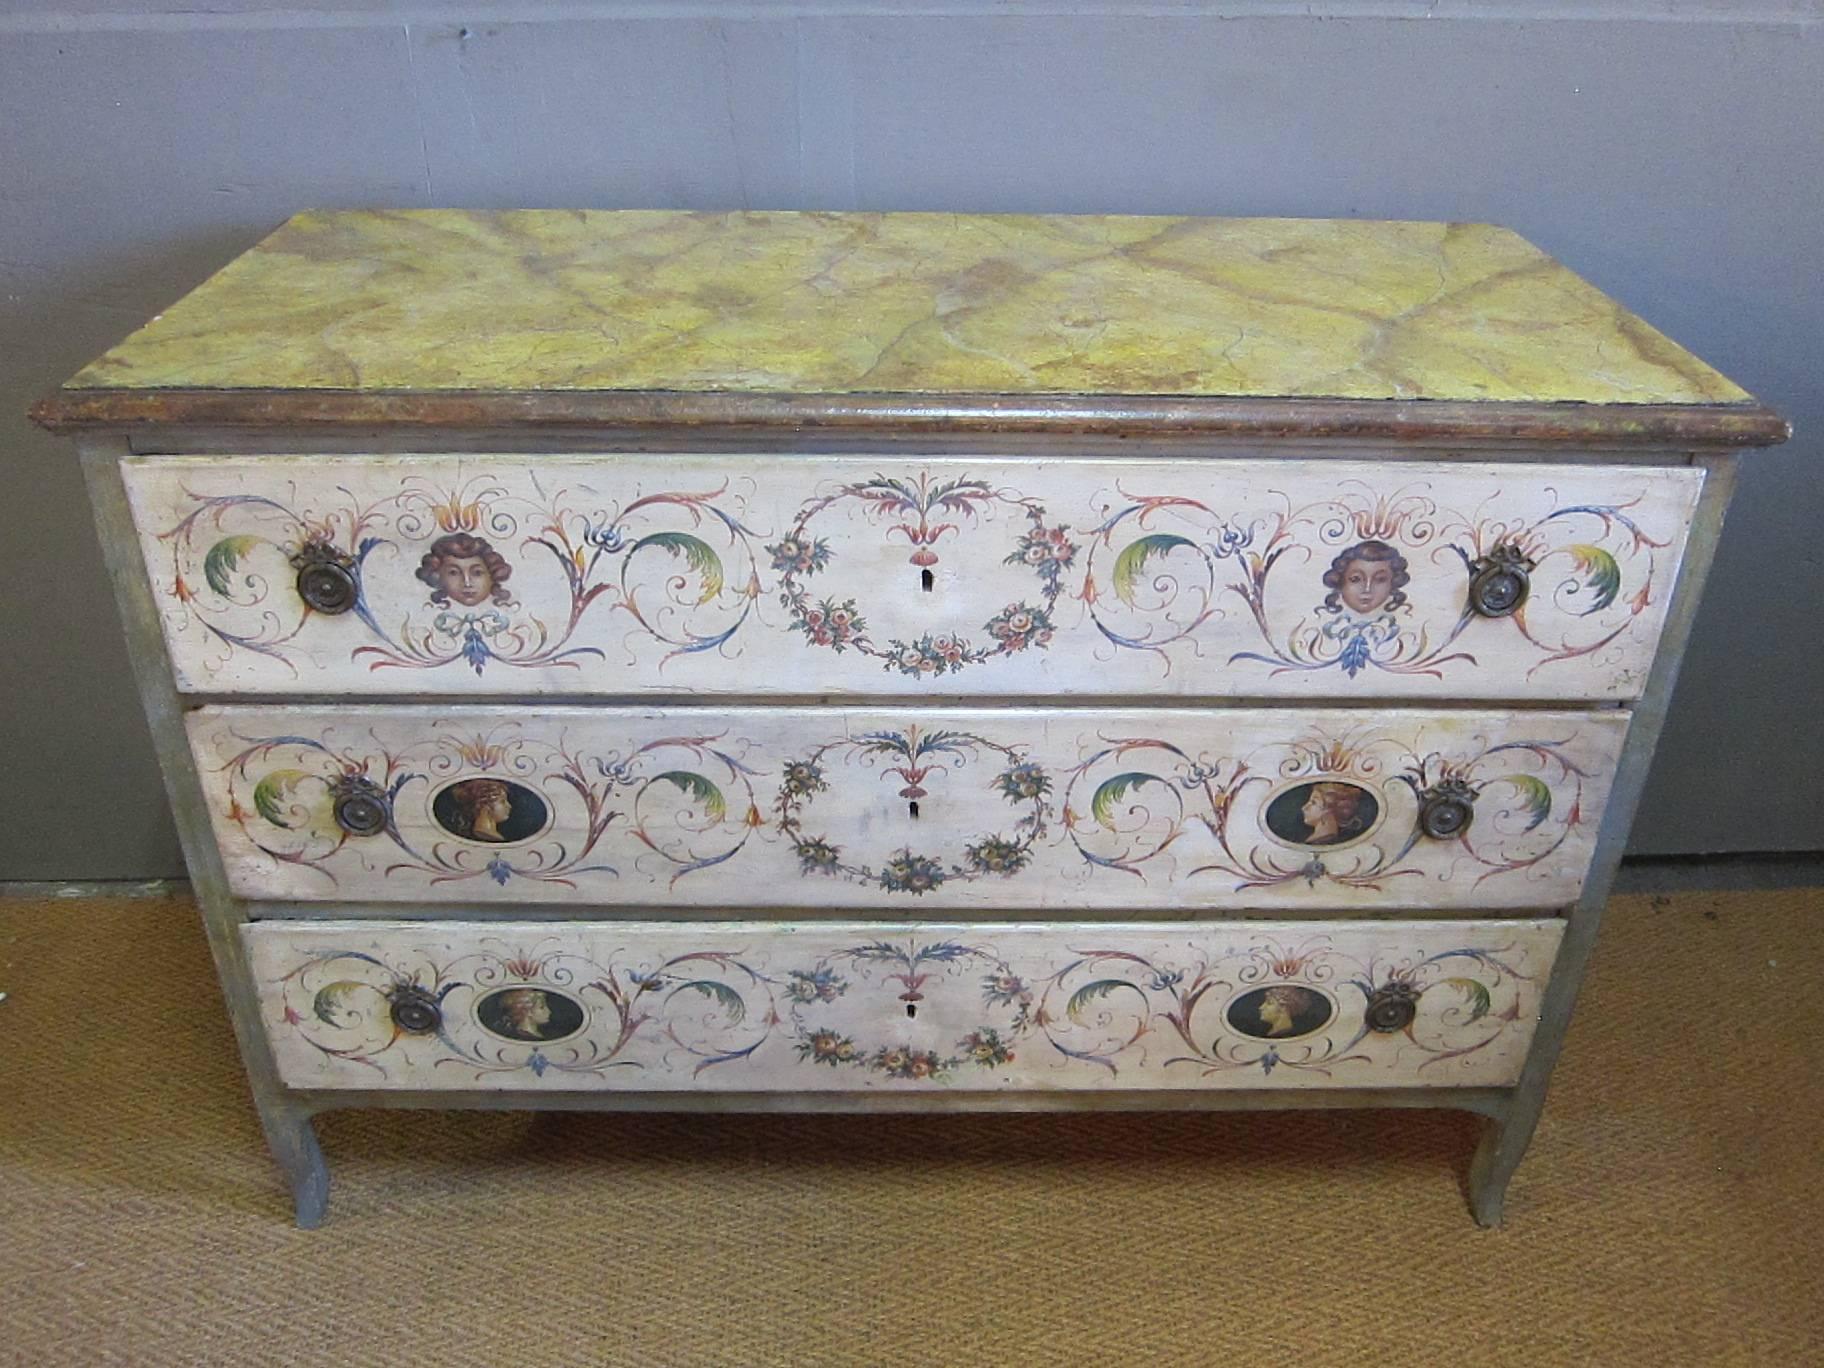 Early 19th century Italian painted commode chest of drawers. Large-scale with excellent color, faux marble painted top. Frame color is faded blue to green with many colors found throughout the paint work. Over time some paint work has been